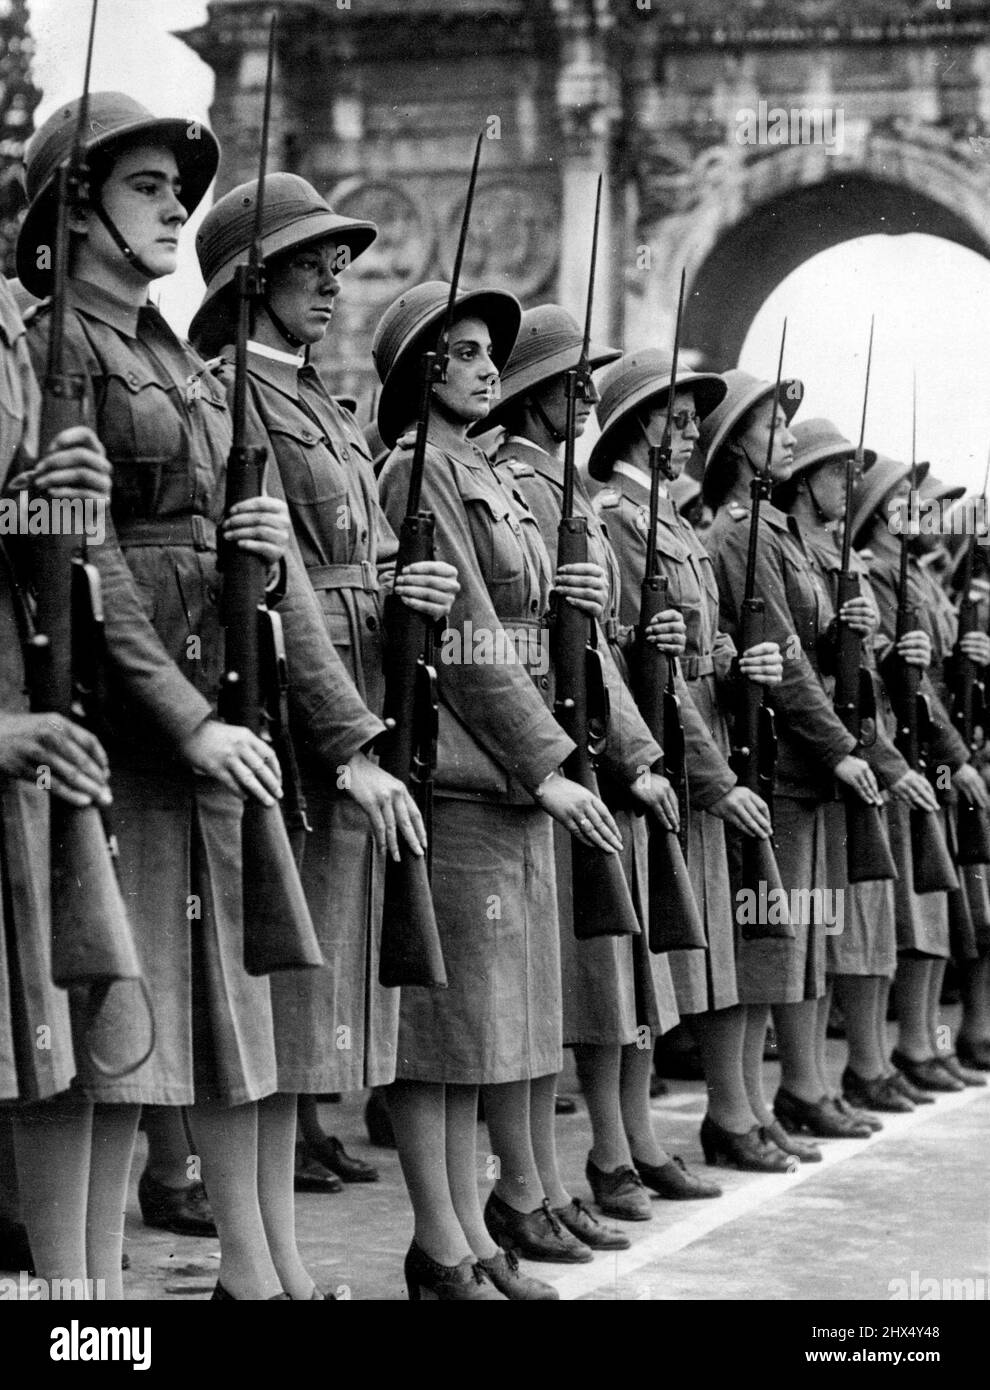 Khaki-dressed girls in sun helmets and carrying rifles with fixed bayonets stand at attention after marching past Signor Mussolini in Rome, where 70,000 Fascist women and girls took part in a parade for their leader. June 10, 1939. (Photo by The Associated Press of Great Britain Ltd.) Stock Photo